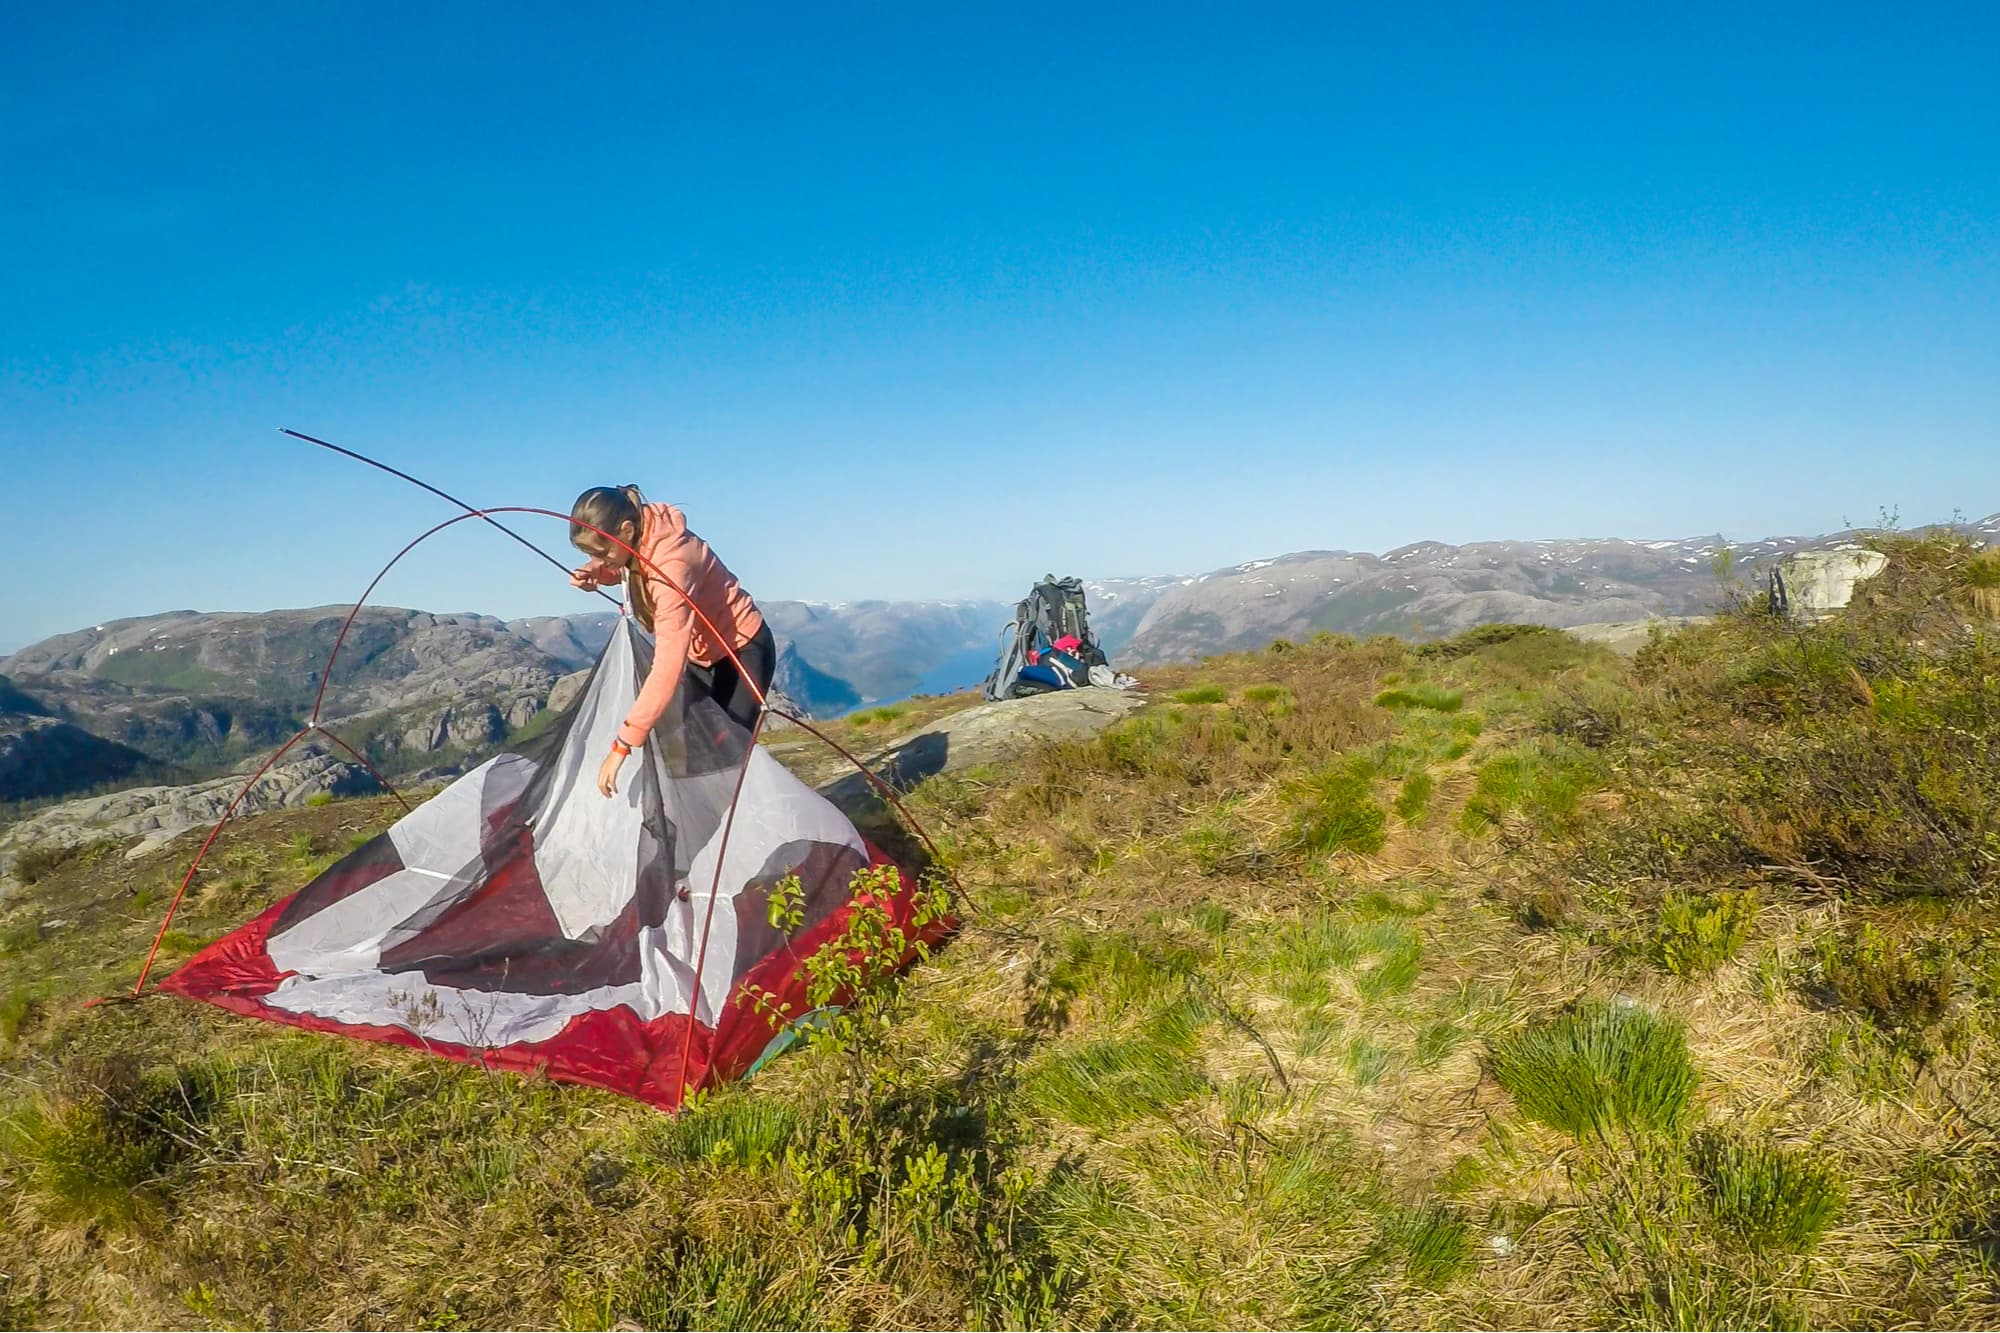 10 Questions Everyone Has Before Their First Time Camping